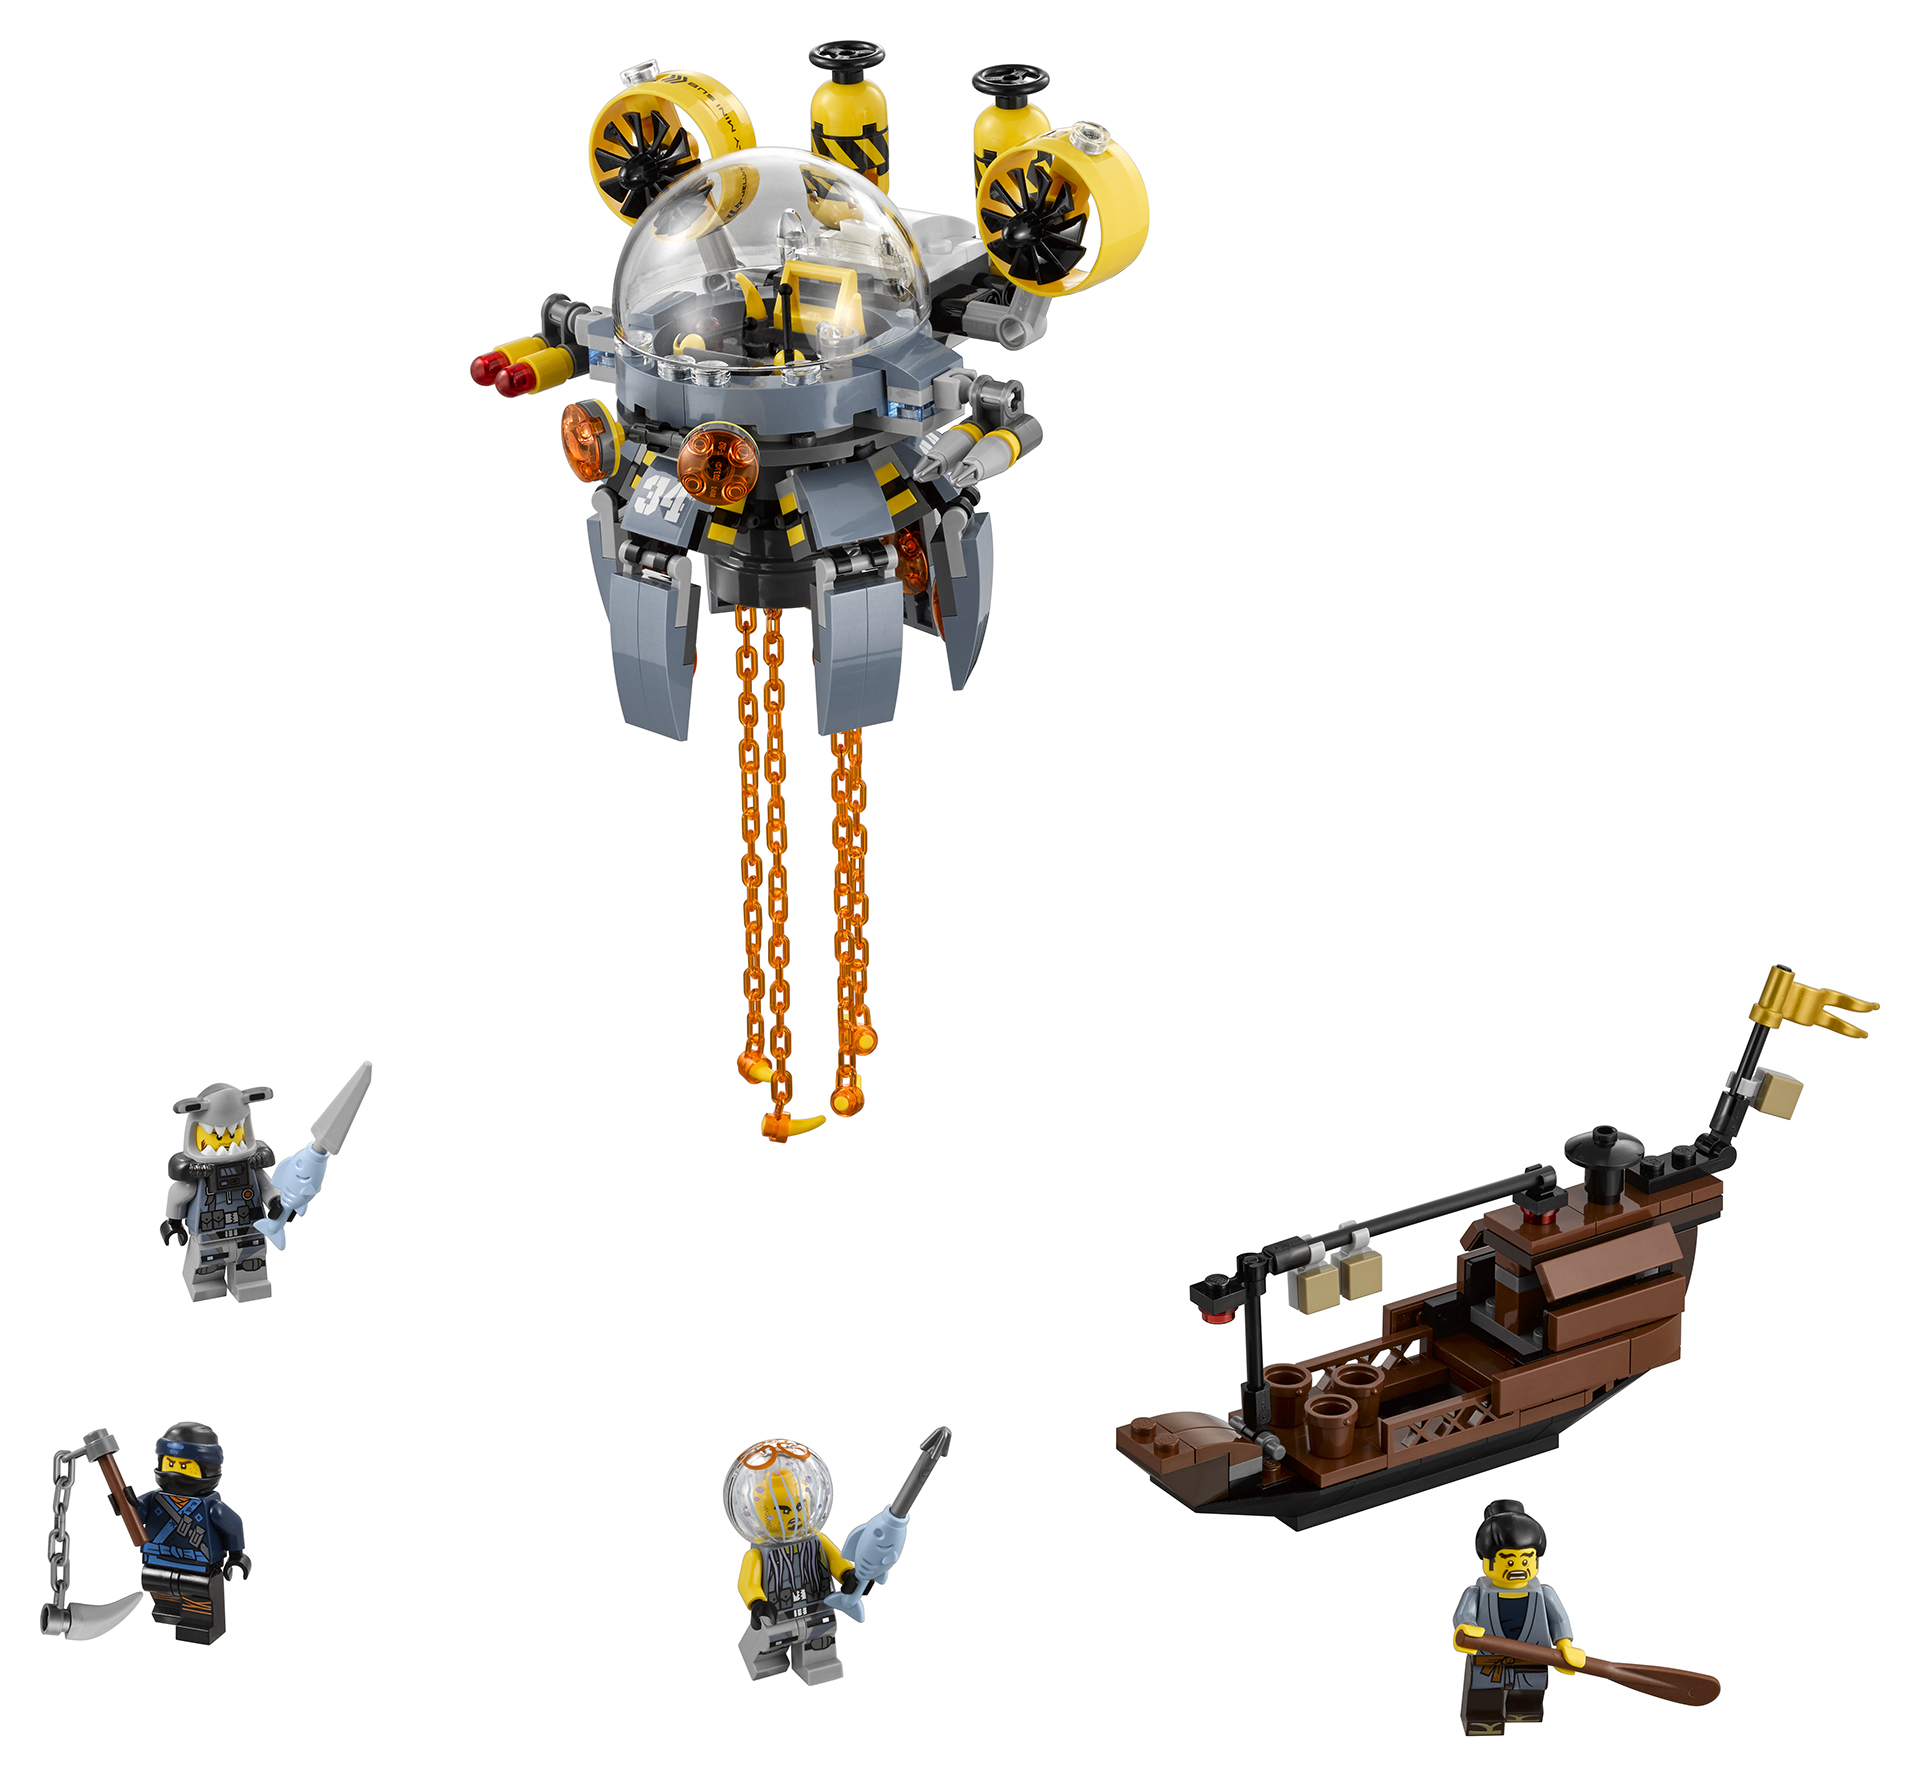 The Ninjago Movie Is Spawning Some Very Cool Lego Sets 